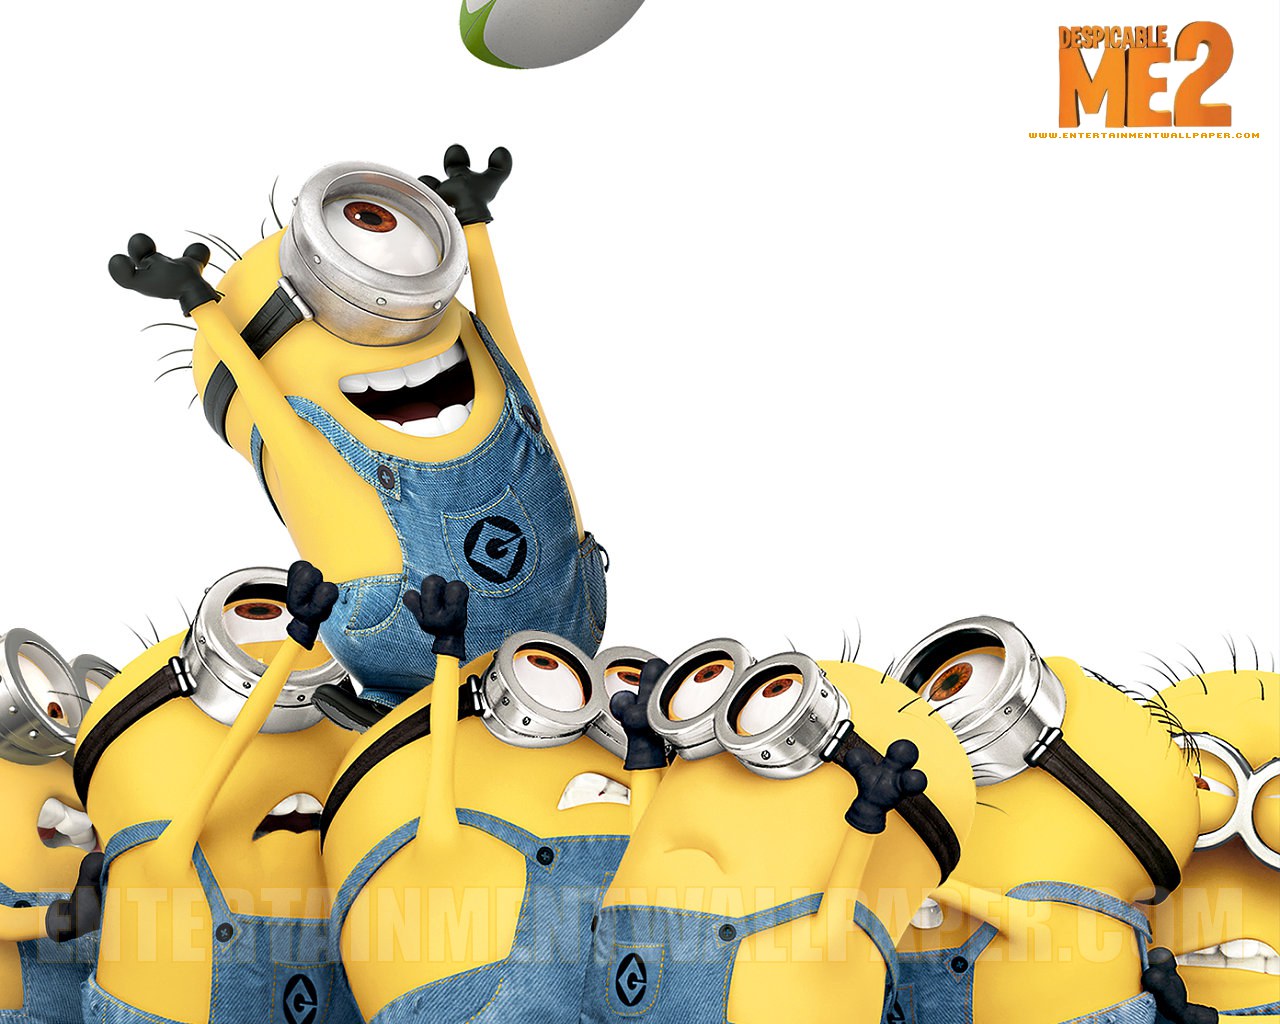 Despicable Me 2 images, posters, Despicable Me 2 widescreen ...